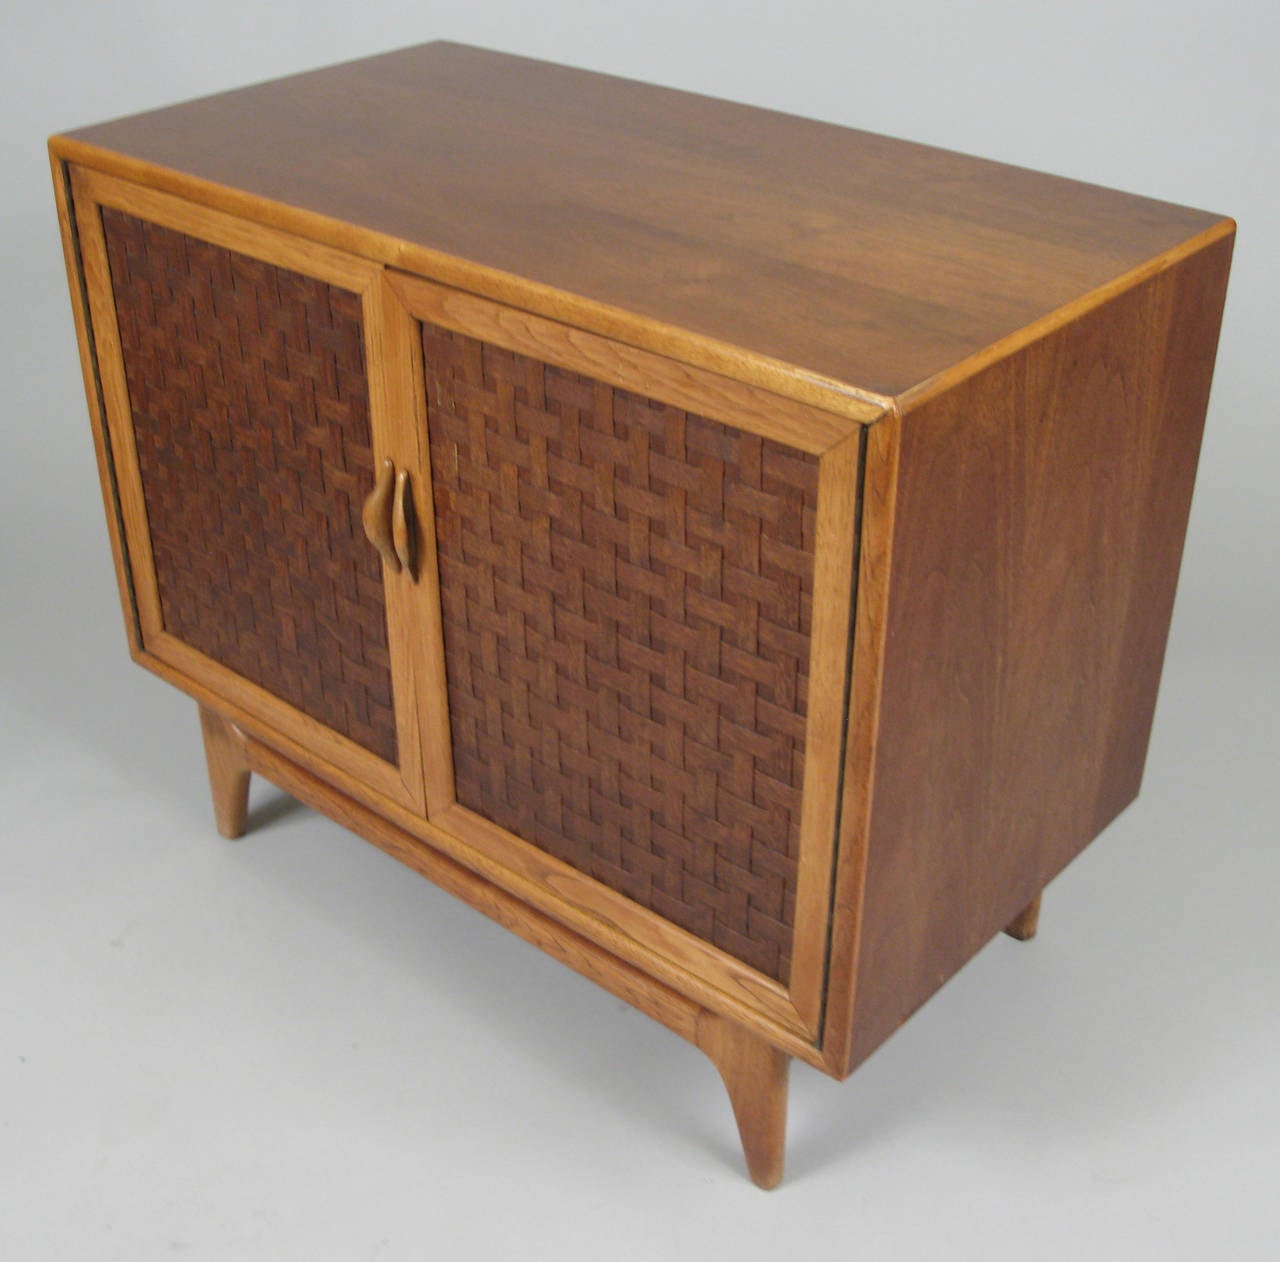 A very handsome 1960s two-door cabinet in oak with beautiful woven patterned panels inset into the doors. Interior has a single adjustable shelf.